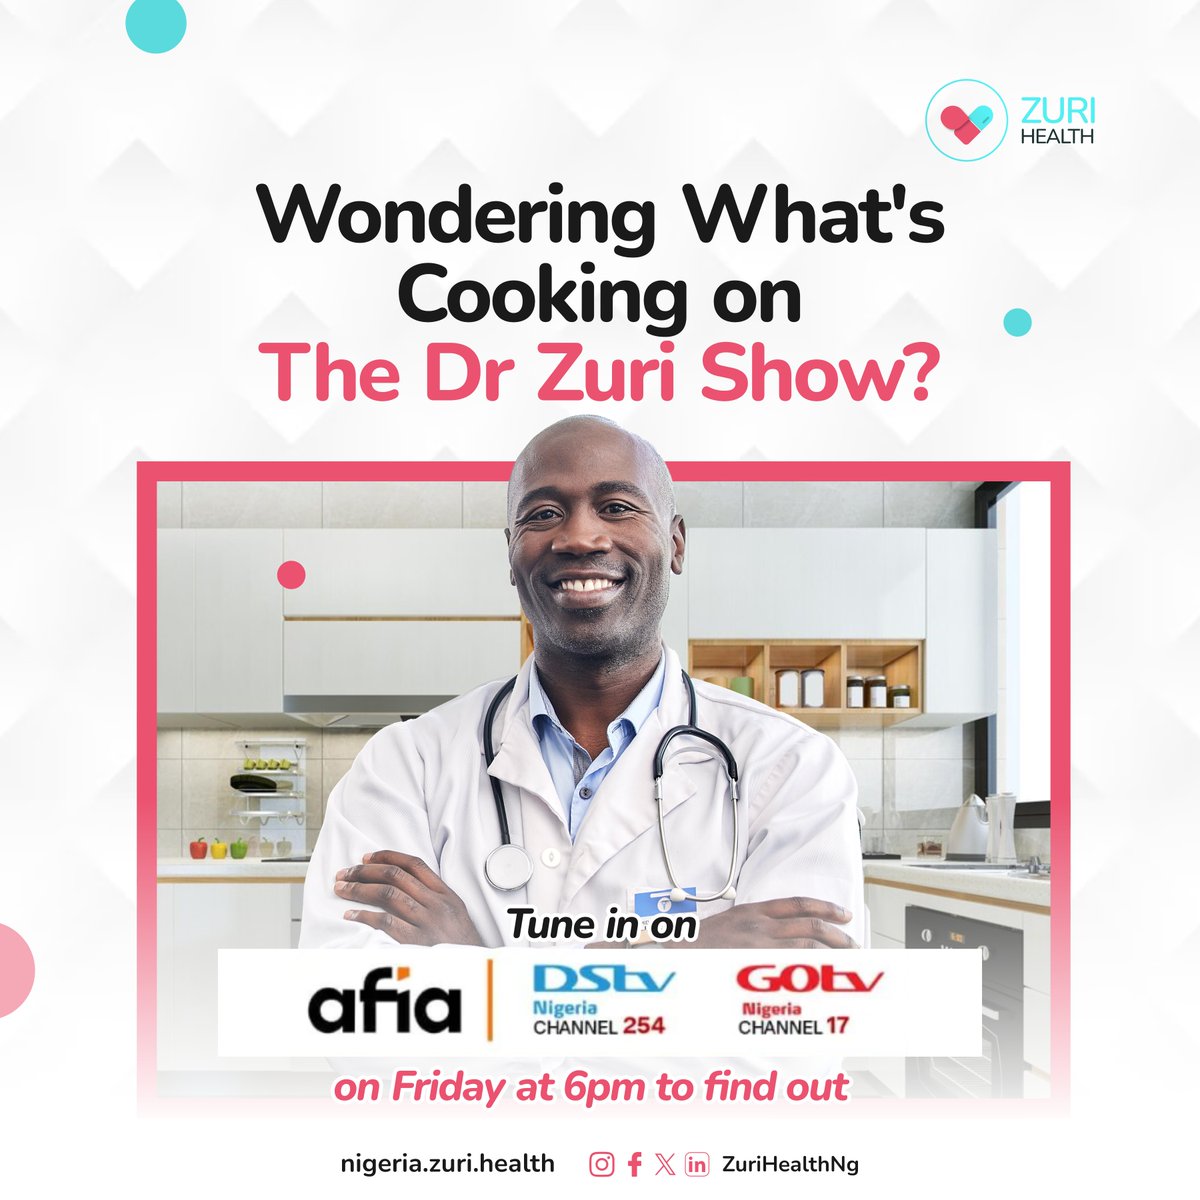 Don't miss today's episode🔥 @AfiaTvOfficial is the channel to watch because it takes care of your health issues. #zurihealth #malaria #health #nigeria #drzuri #zurihealthnigeria #healthtech